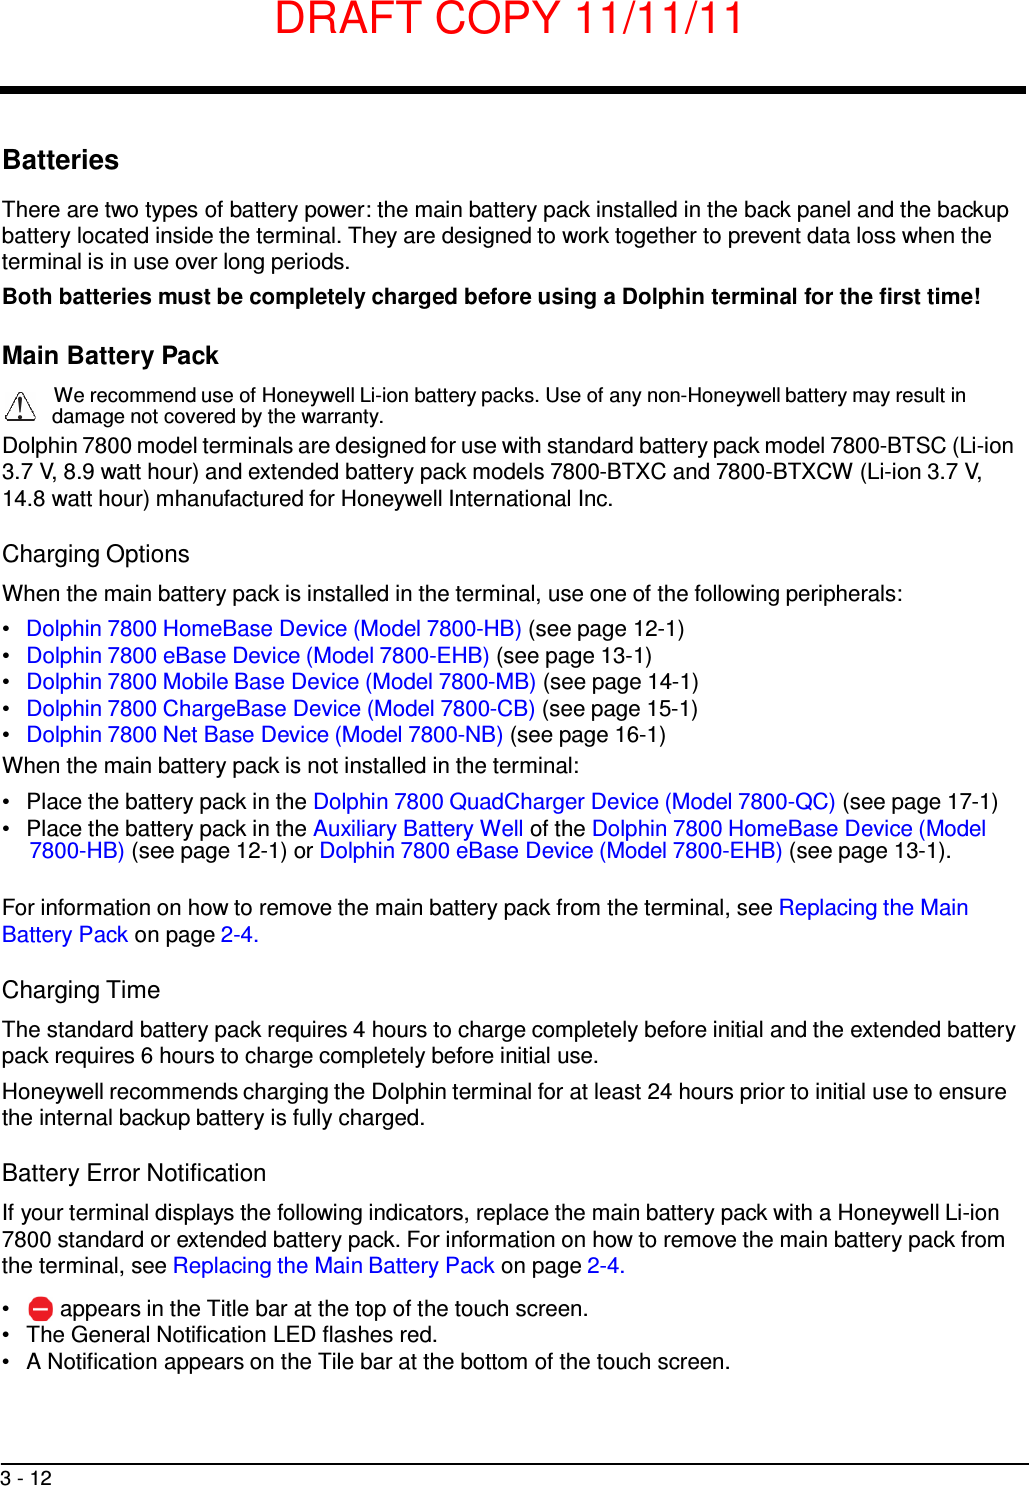 DRAFT COPY 11/11/11 3 - 12     Batteries  There are two types of battery power: the main battery pack installed in the back panel and the backup battery located inside the terminal. They are designed to work together to prevent data loss when the terminal is in use over long periods. Both batteries must be completely charged before using a Dolphin terminal for the first time!  Main Battery Pack  We recommend use of Honeywell Li-ion battery packs. Use of any non-Honeywell battery may result in  damage not covered by the warranty. Dolphin 7800 model terminals are designed for use with standard battery pack model 7800-BTSC (Li-ion 3.7 V, 8.9 watt hour) and extended battery pack models 7800-BTXC and 7800-BTXCW (Li-ion 3.7 V, 14.8 watt hour) mhanufactured for Honeywell International Inc.  Charging Options  When the main battery pack is installed in the terminal, use one of the following peripherals: •   Dolphin 7800 HomeBase Device (Model 7800-HB) (see page 12-1) •   Dolphin 7800 eBase Device (Model 7800-EHB) (see page 13-1) •   Dolphin 7800 Mobile Base Device (Model 7800-MB) (see page 14-1) •   Dolphin 7800 ChargeBase Device (Model 7800-CB) (see page 15-1) •   Dolphin 7800 Net Base Device (Model 7800-NB) (see page 16-1) When the main battery pack is not installed in the terminal: •   Place the battery pack in the Dolphin 7800 QuadCharger Device (Model 7800-QC) (see page 17-1) •   Place the battery pack in the Auxiliary Battery Well of the Dolphin 7800 HomeBase Device (Model 7800-HB) (see page 12-1) or Dolphin 7800 eBase Device (Model 7800-EHB) (see page 13-1).   For information on how to remove the main battery pack from the terminal, see Replacing the Main Battery Pack on page 2-4.  Charging Time  The standard battery pack requires 4 hours to charge completely before initial and the extended battery pack requires 6 hours to charge completely before initial use. Honeywell recommends charging the Dolphin terminal for at least 24 hours prior to initial use to ensure the internal backup battery is fully charged.  Battery Error Notification  If your terminal displays the following indicators, replace the main battery pack with a Honeywell Li-ion 7800 standard or extended battery pack. For information on how to remove the main battery pack from the terminal, see Replacing the Main Battery Pack on page 2-4.  •  appears in the Title bar at the top of the touch screen. •   The General Notification LED flashes red. •   A Notification appears on the Tile bar at the bottom of the touch screen. 